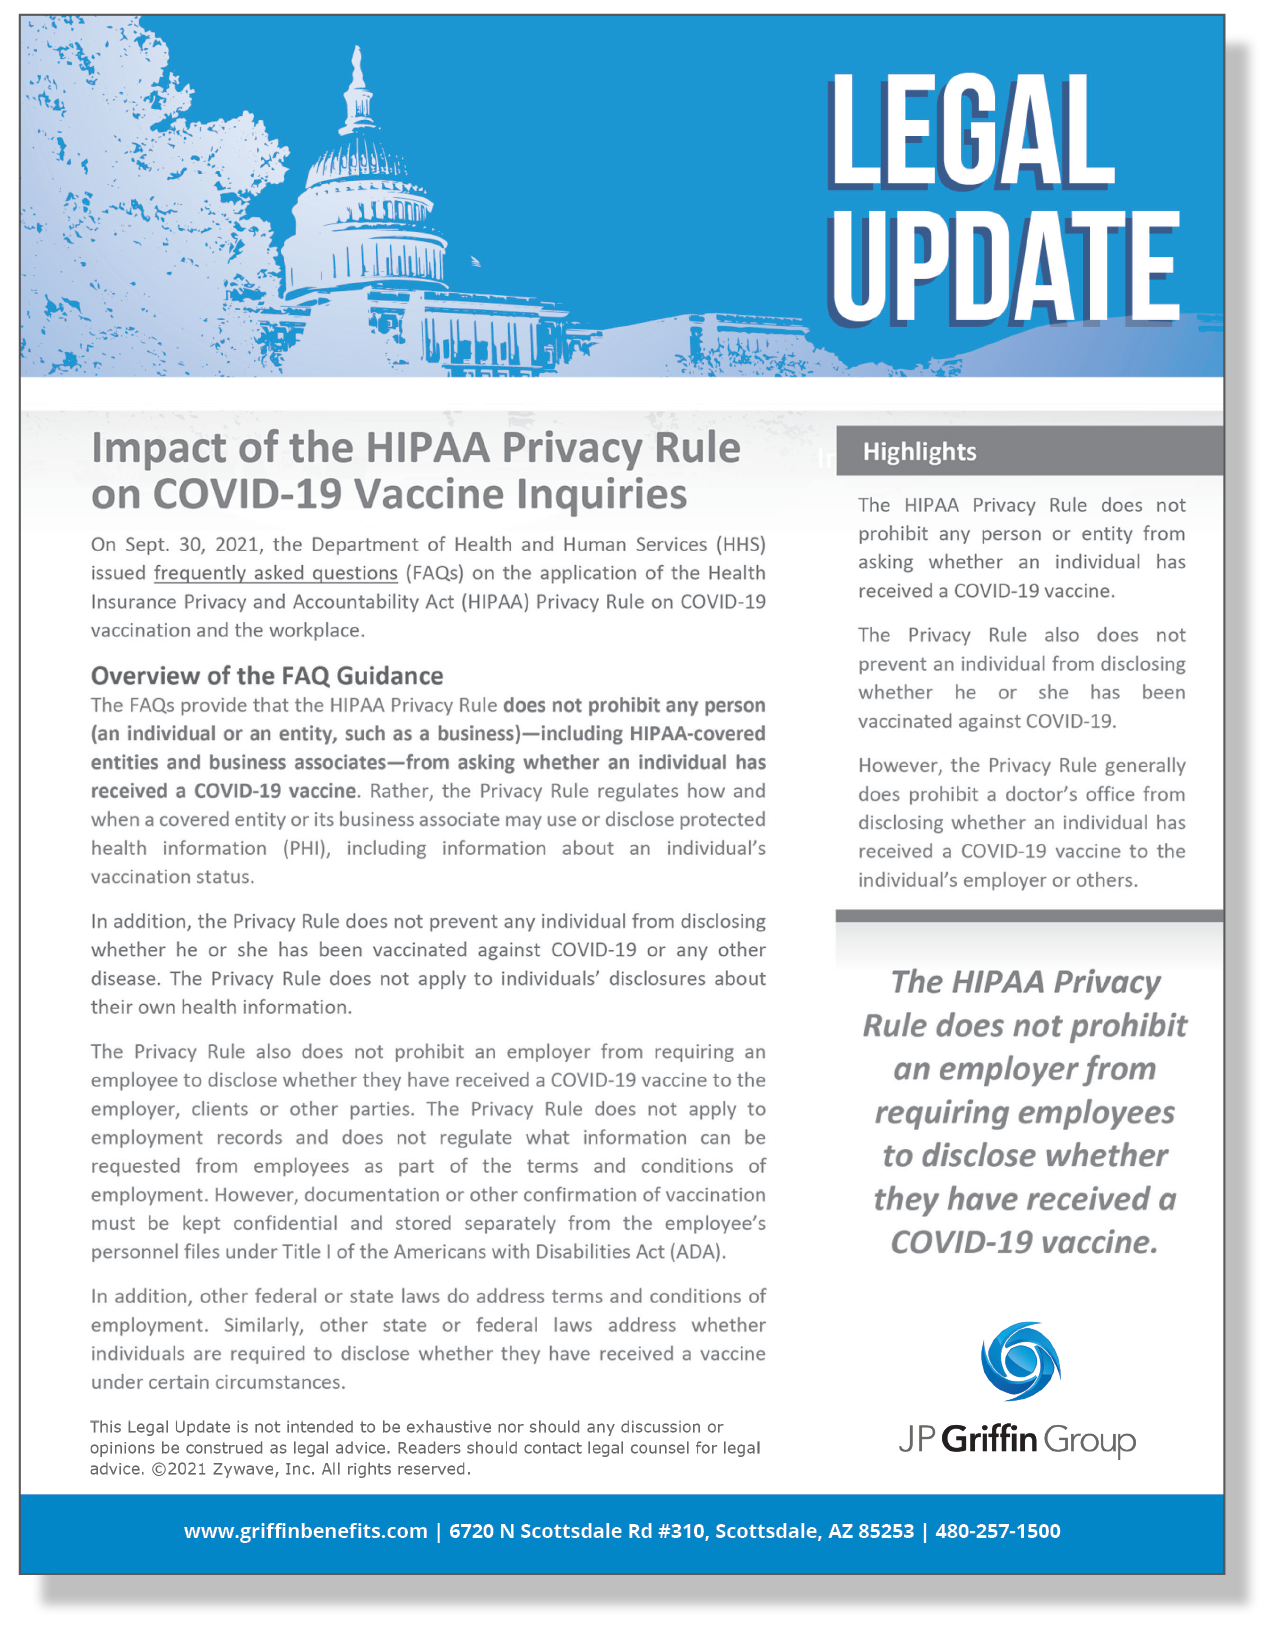 Impact of the HIPAA Privacy Rule on COVID-19 Vaccine Inquiries